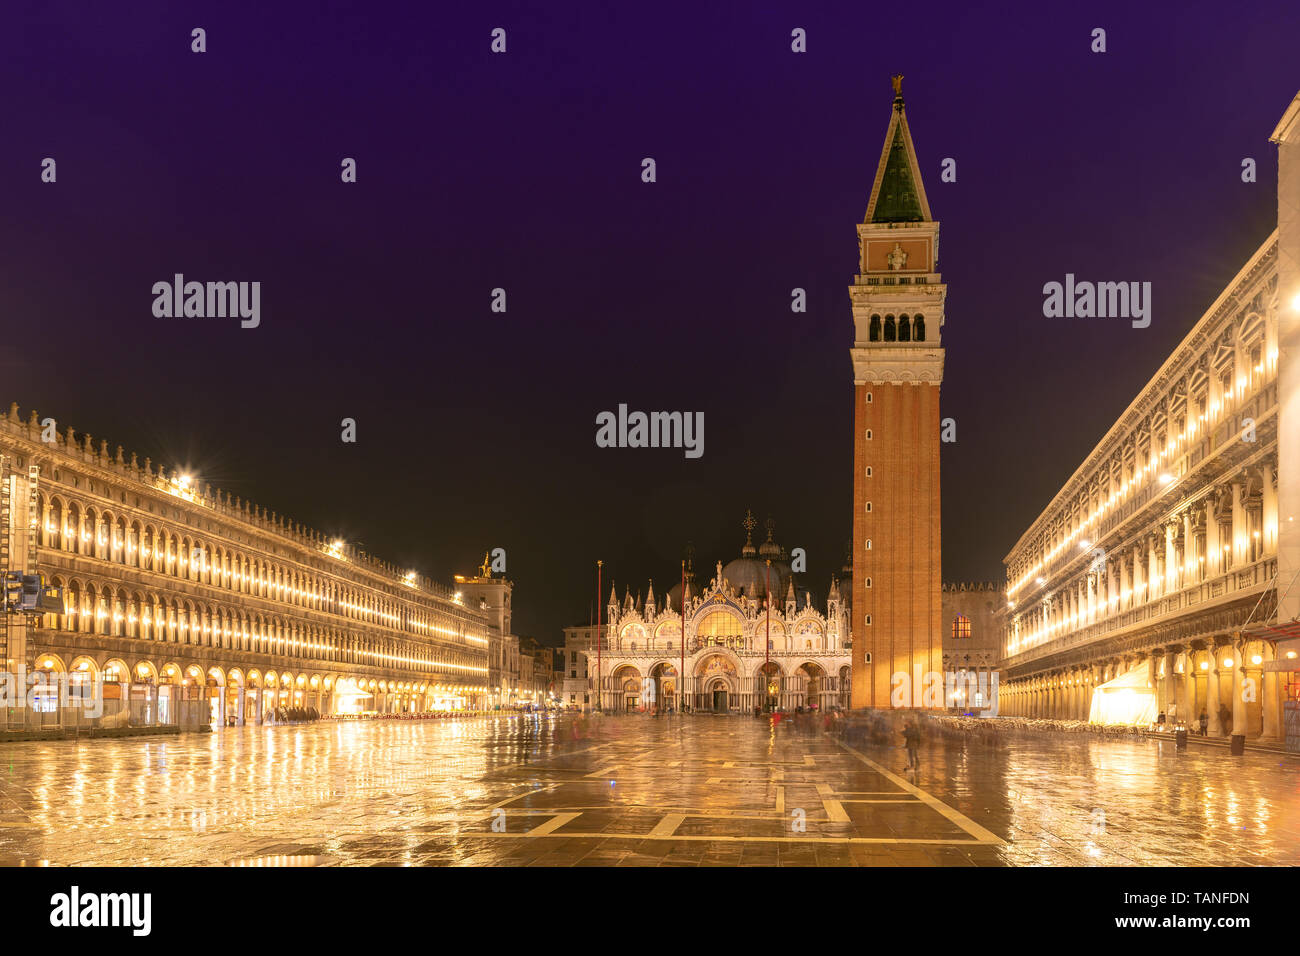 Venice at night, famous San Marco square at night in Venice, Italy, Stock Photo